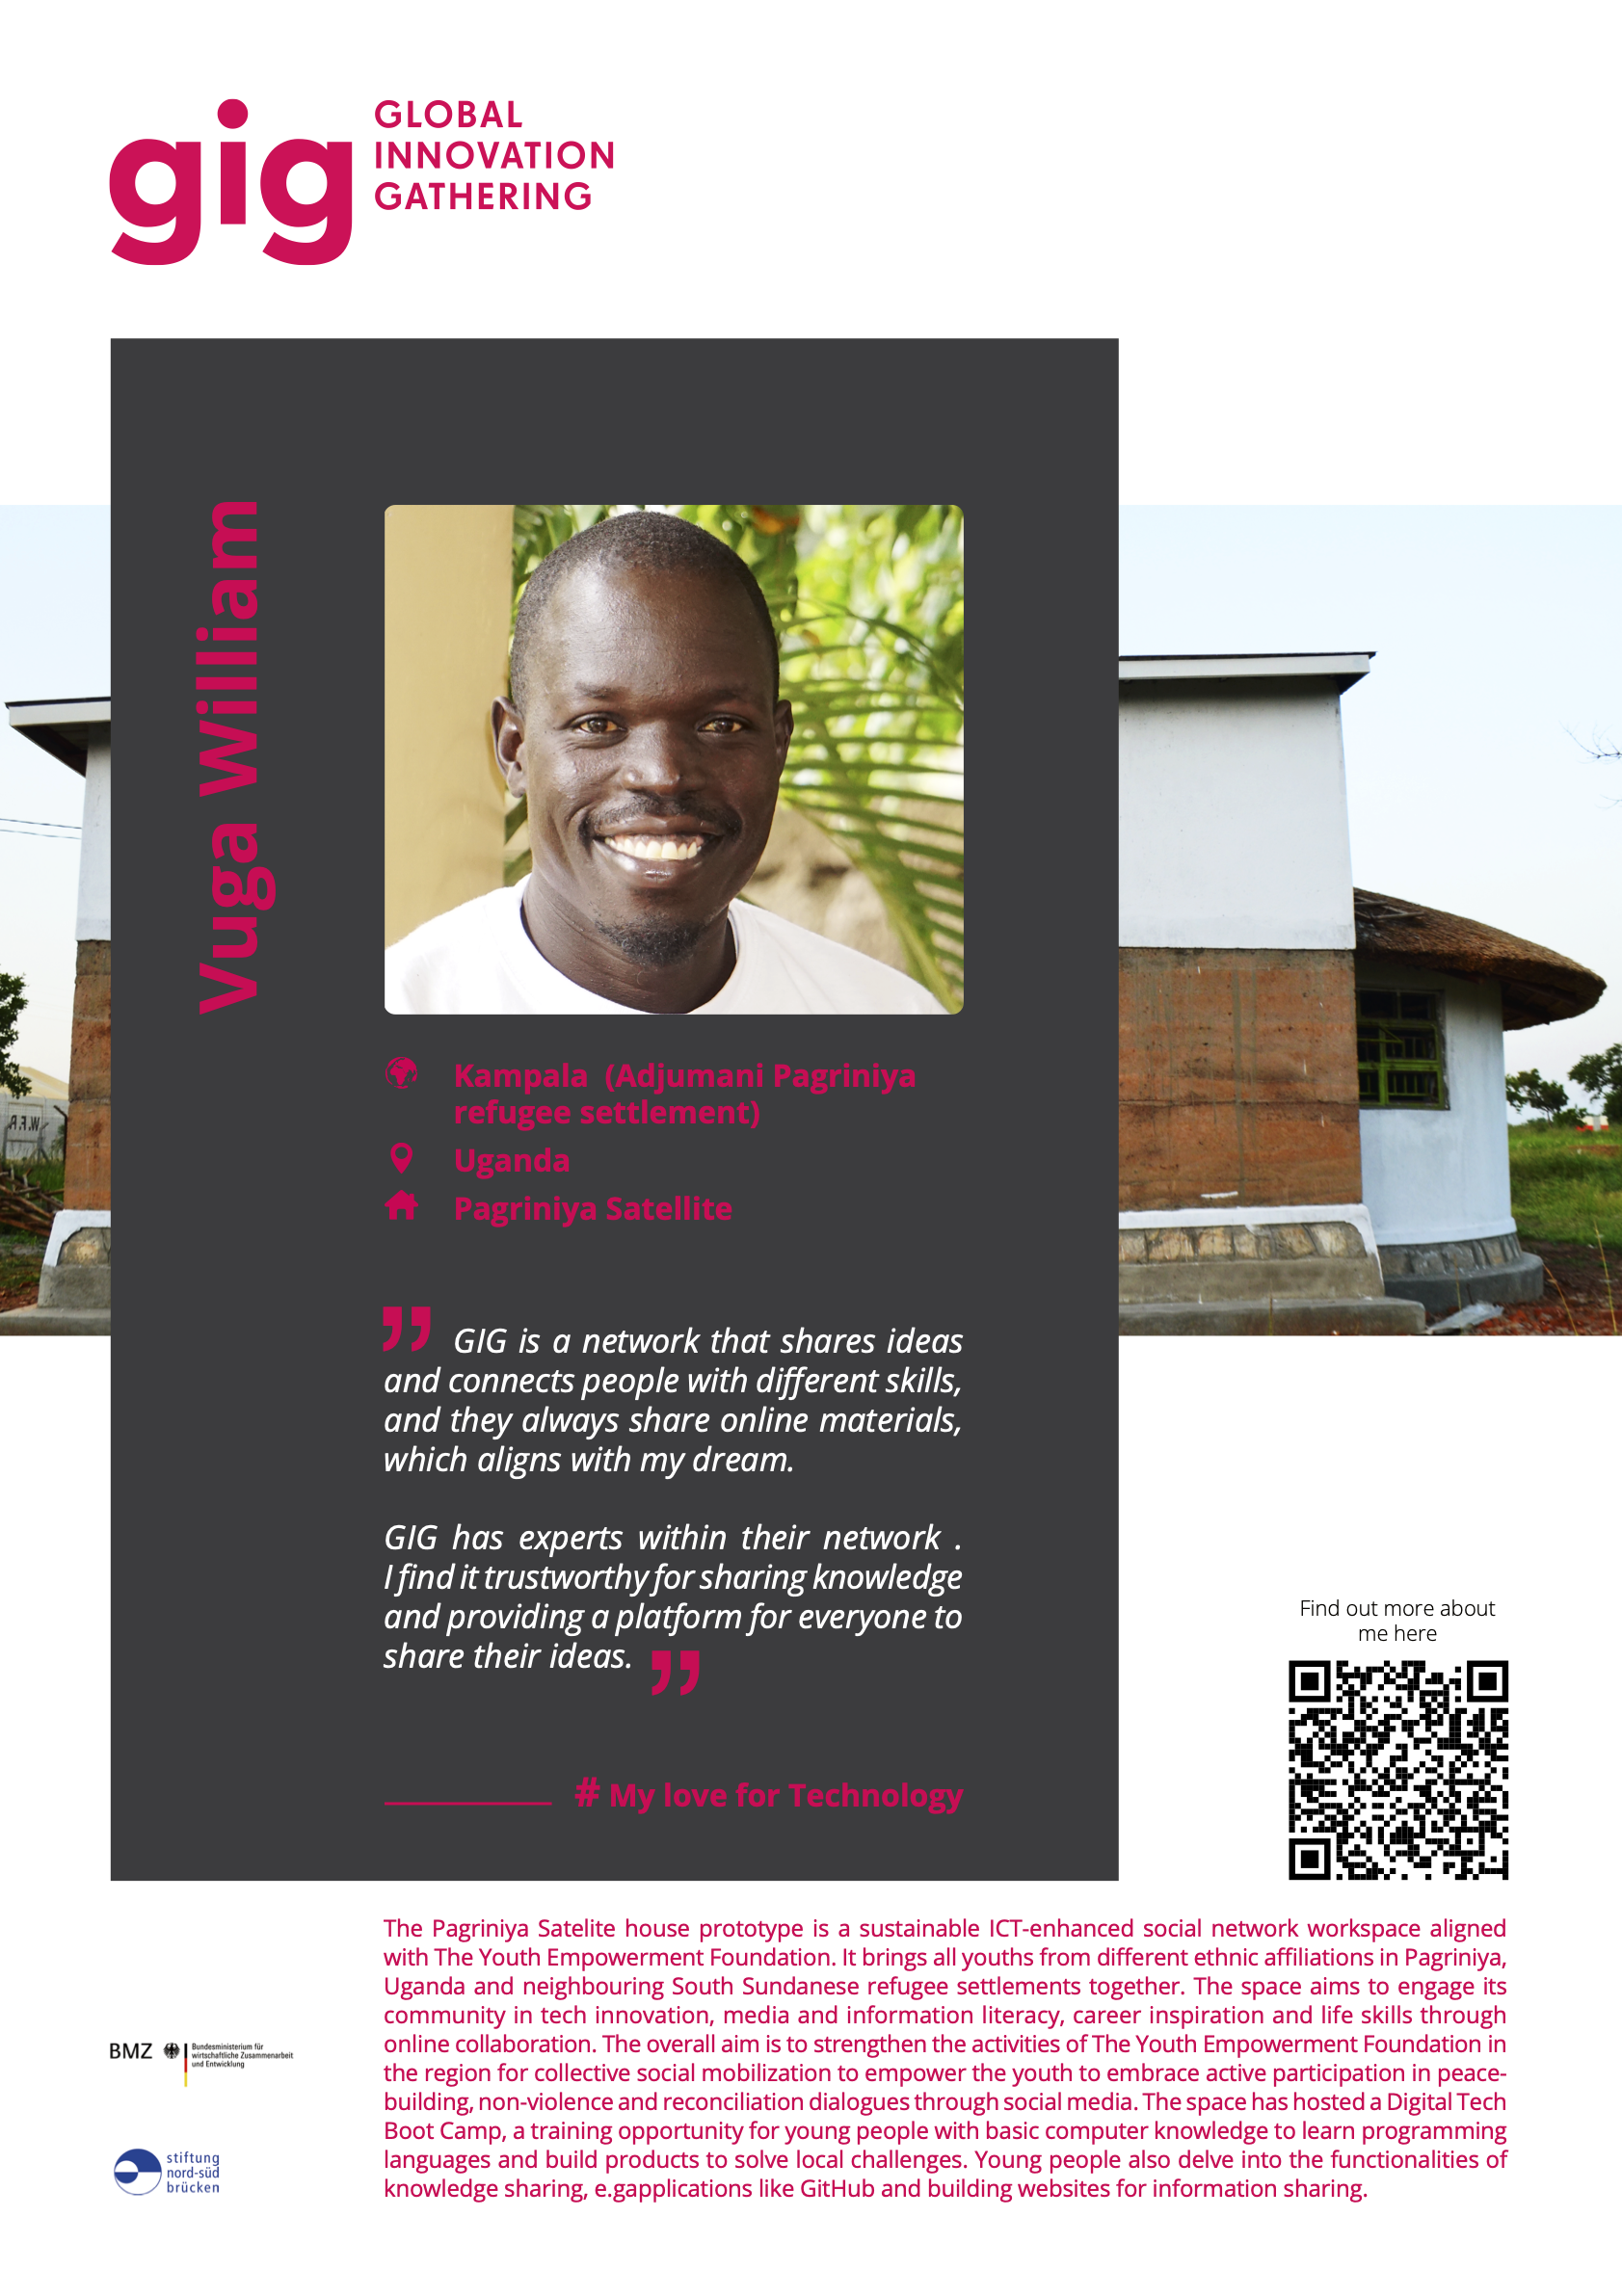 poster 1: Vuga William - https://globalinnovationgathering.org/wp-content/uploads/2023/02/GIGposterVuga-723x1024.png